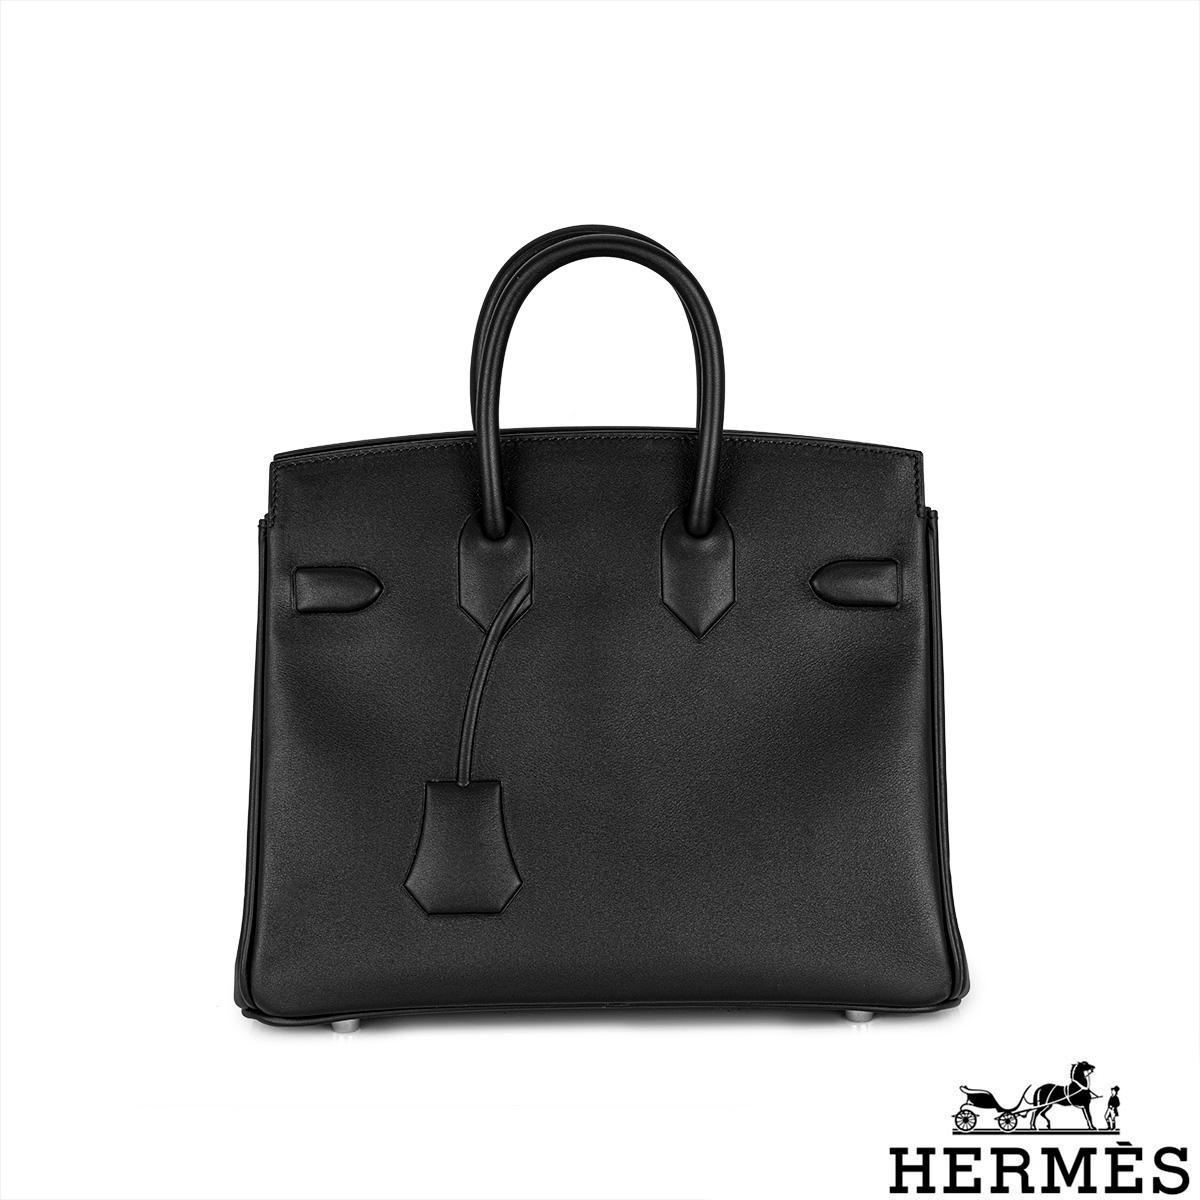 A limited edition Hermès Birkin 25cm handbag. This rare handbag was first created in 2009 by French designer Jean Paul Gaultier as the essence of a Birkin. The exterior of this Birkin is crafted in black Swift leather embossed with the front flap